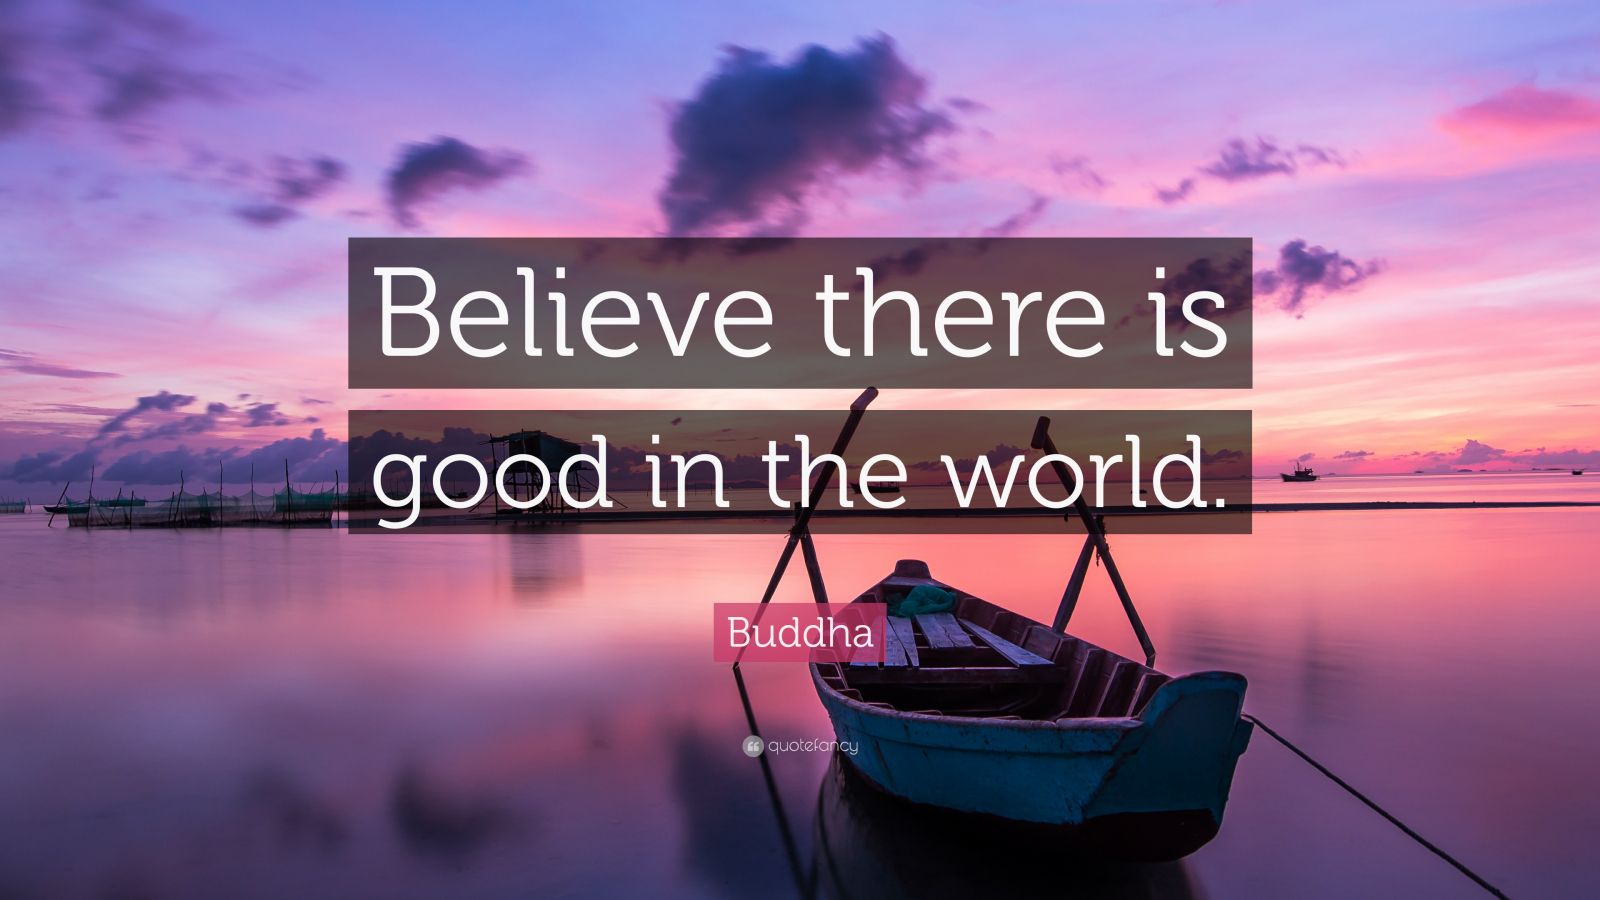 buddha-quote-believe-there-is-good-in-the-world-9-wallpapers